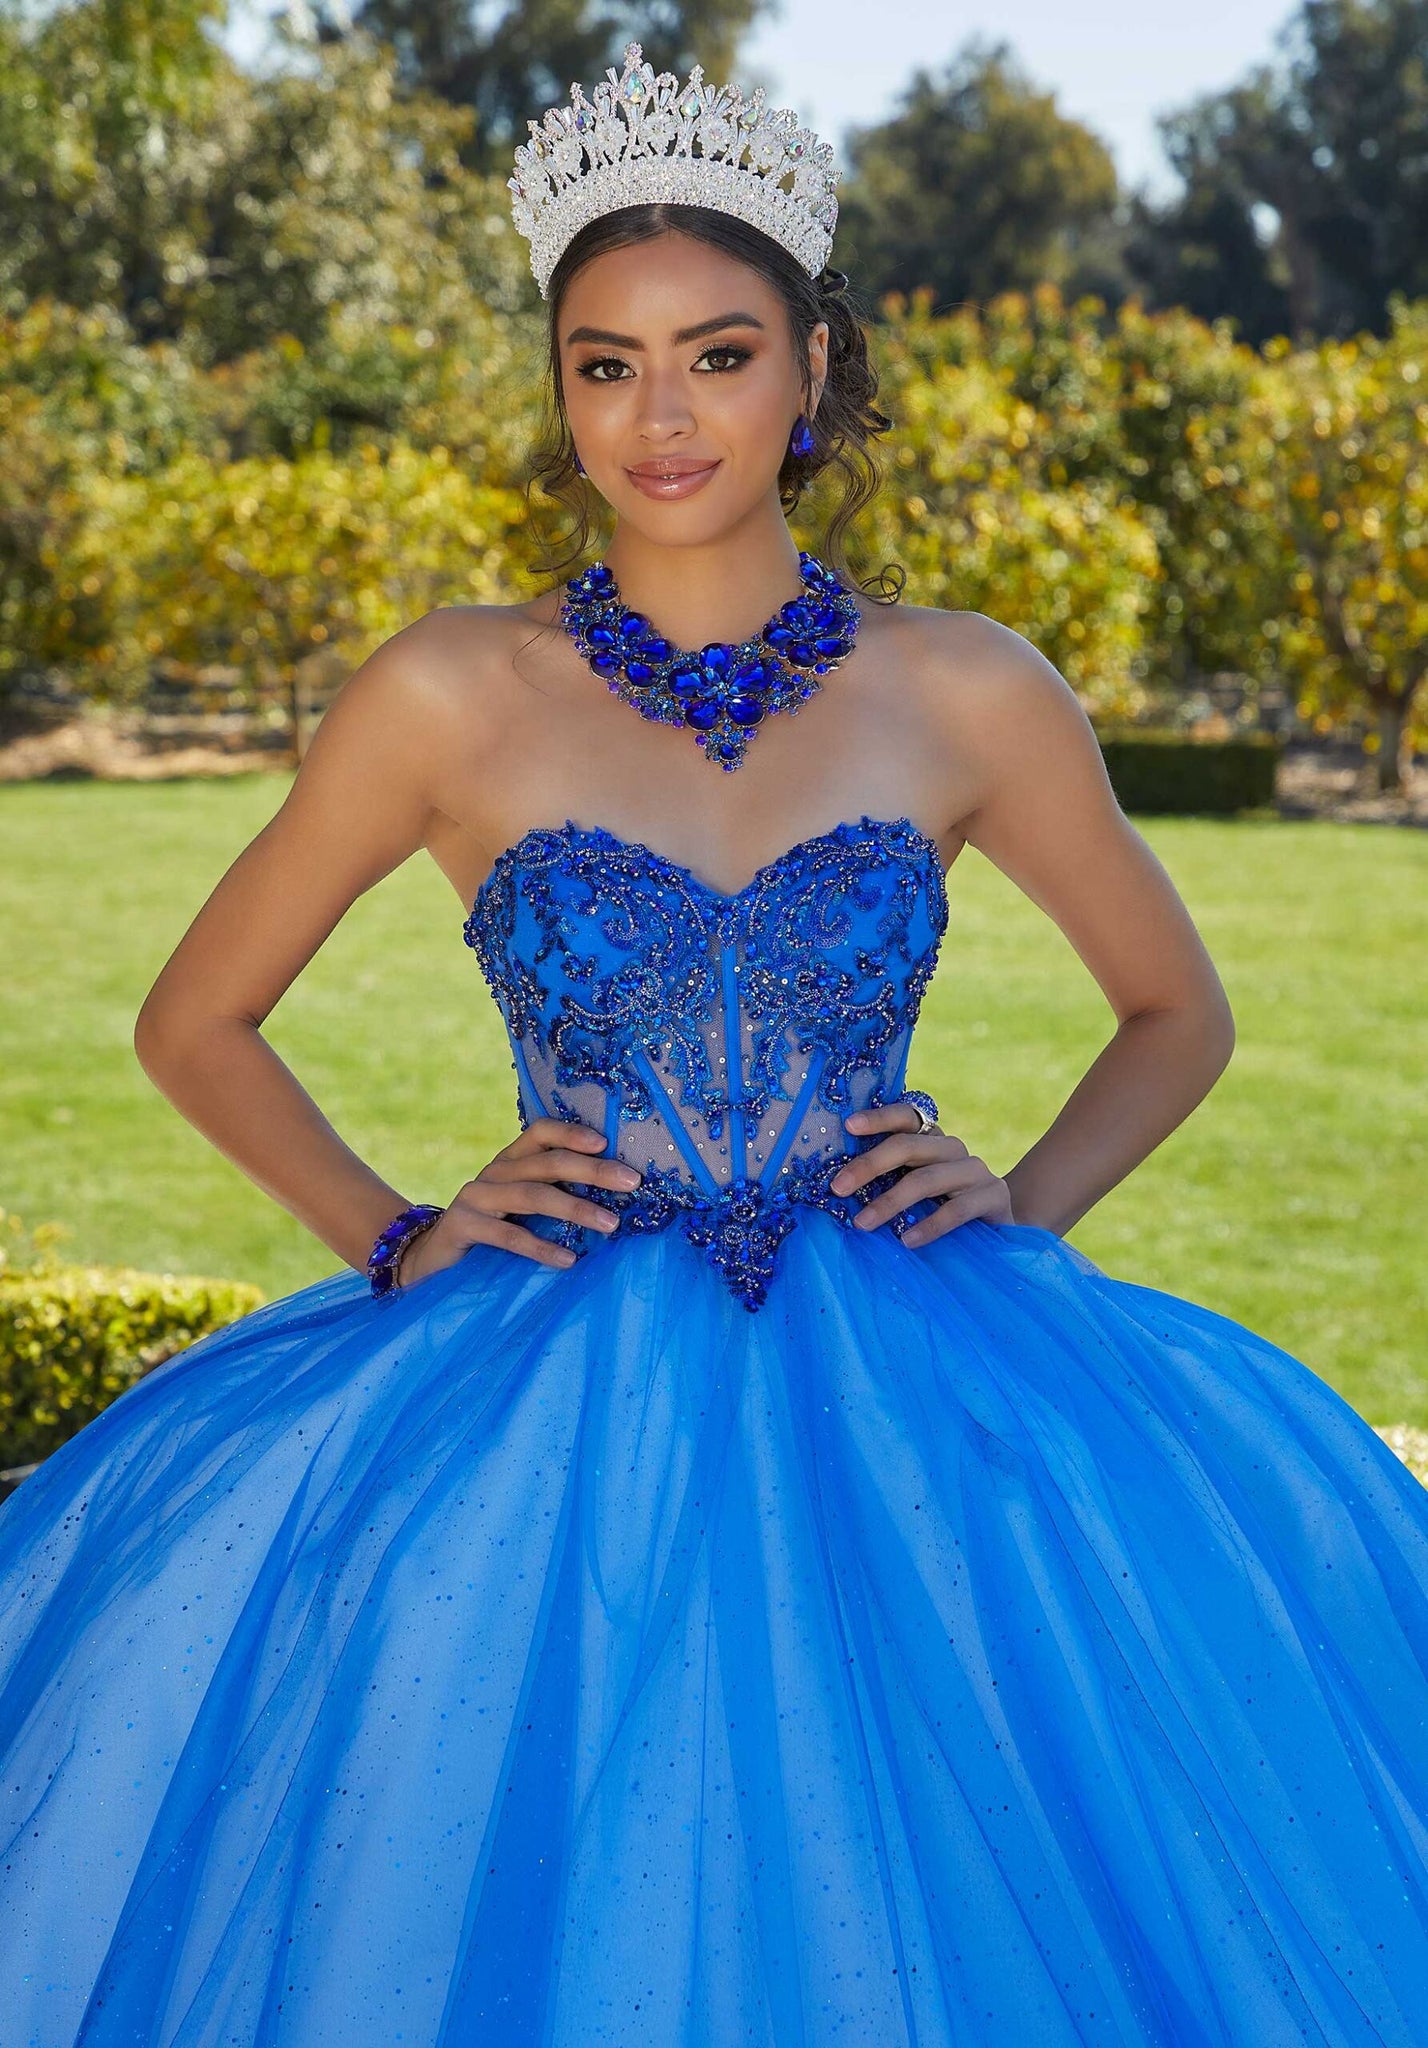 Rhinestone and Crystal Beaded Quinceañera Dress with Sheer Bodice